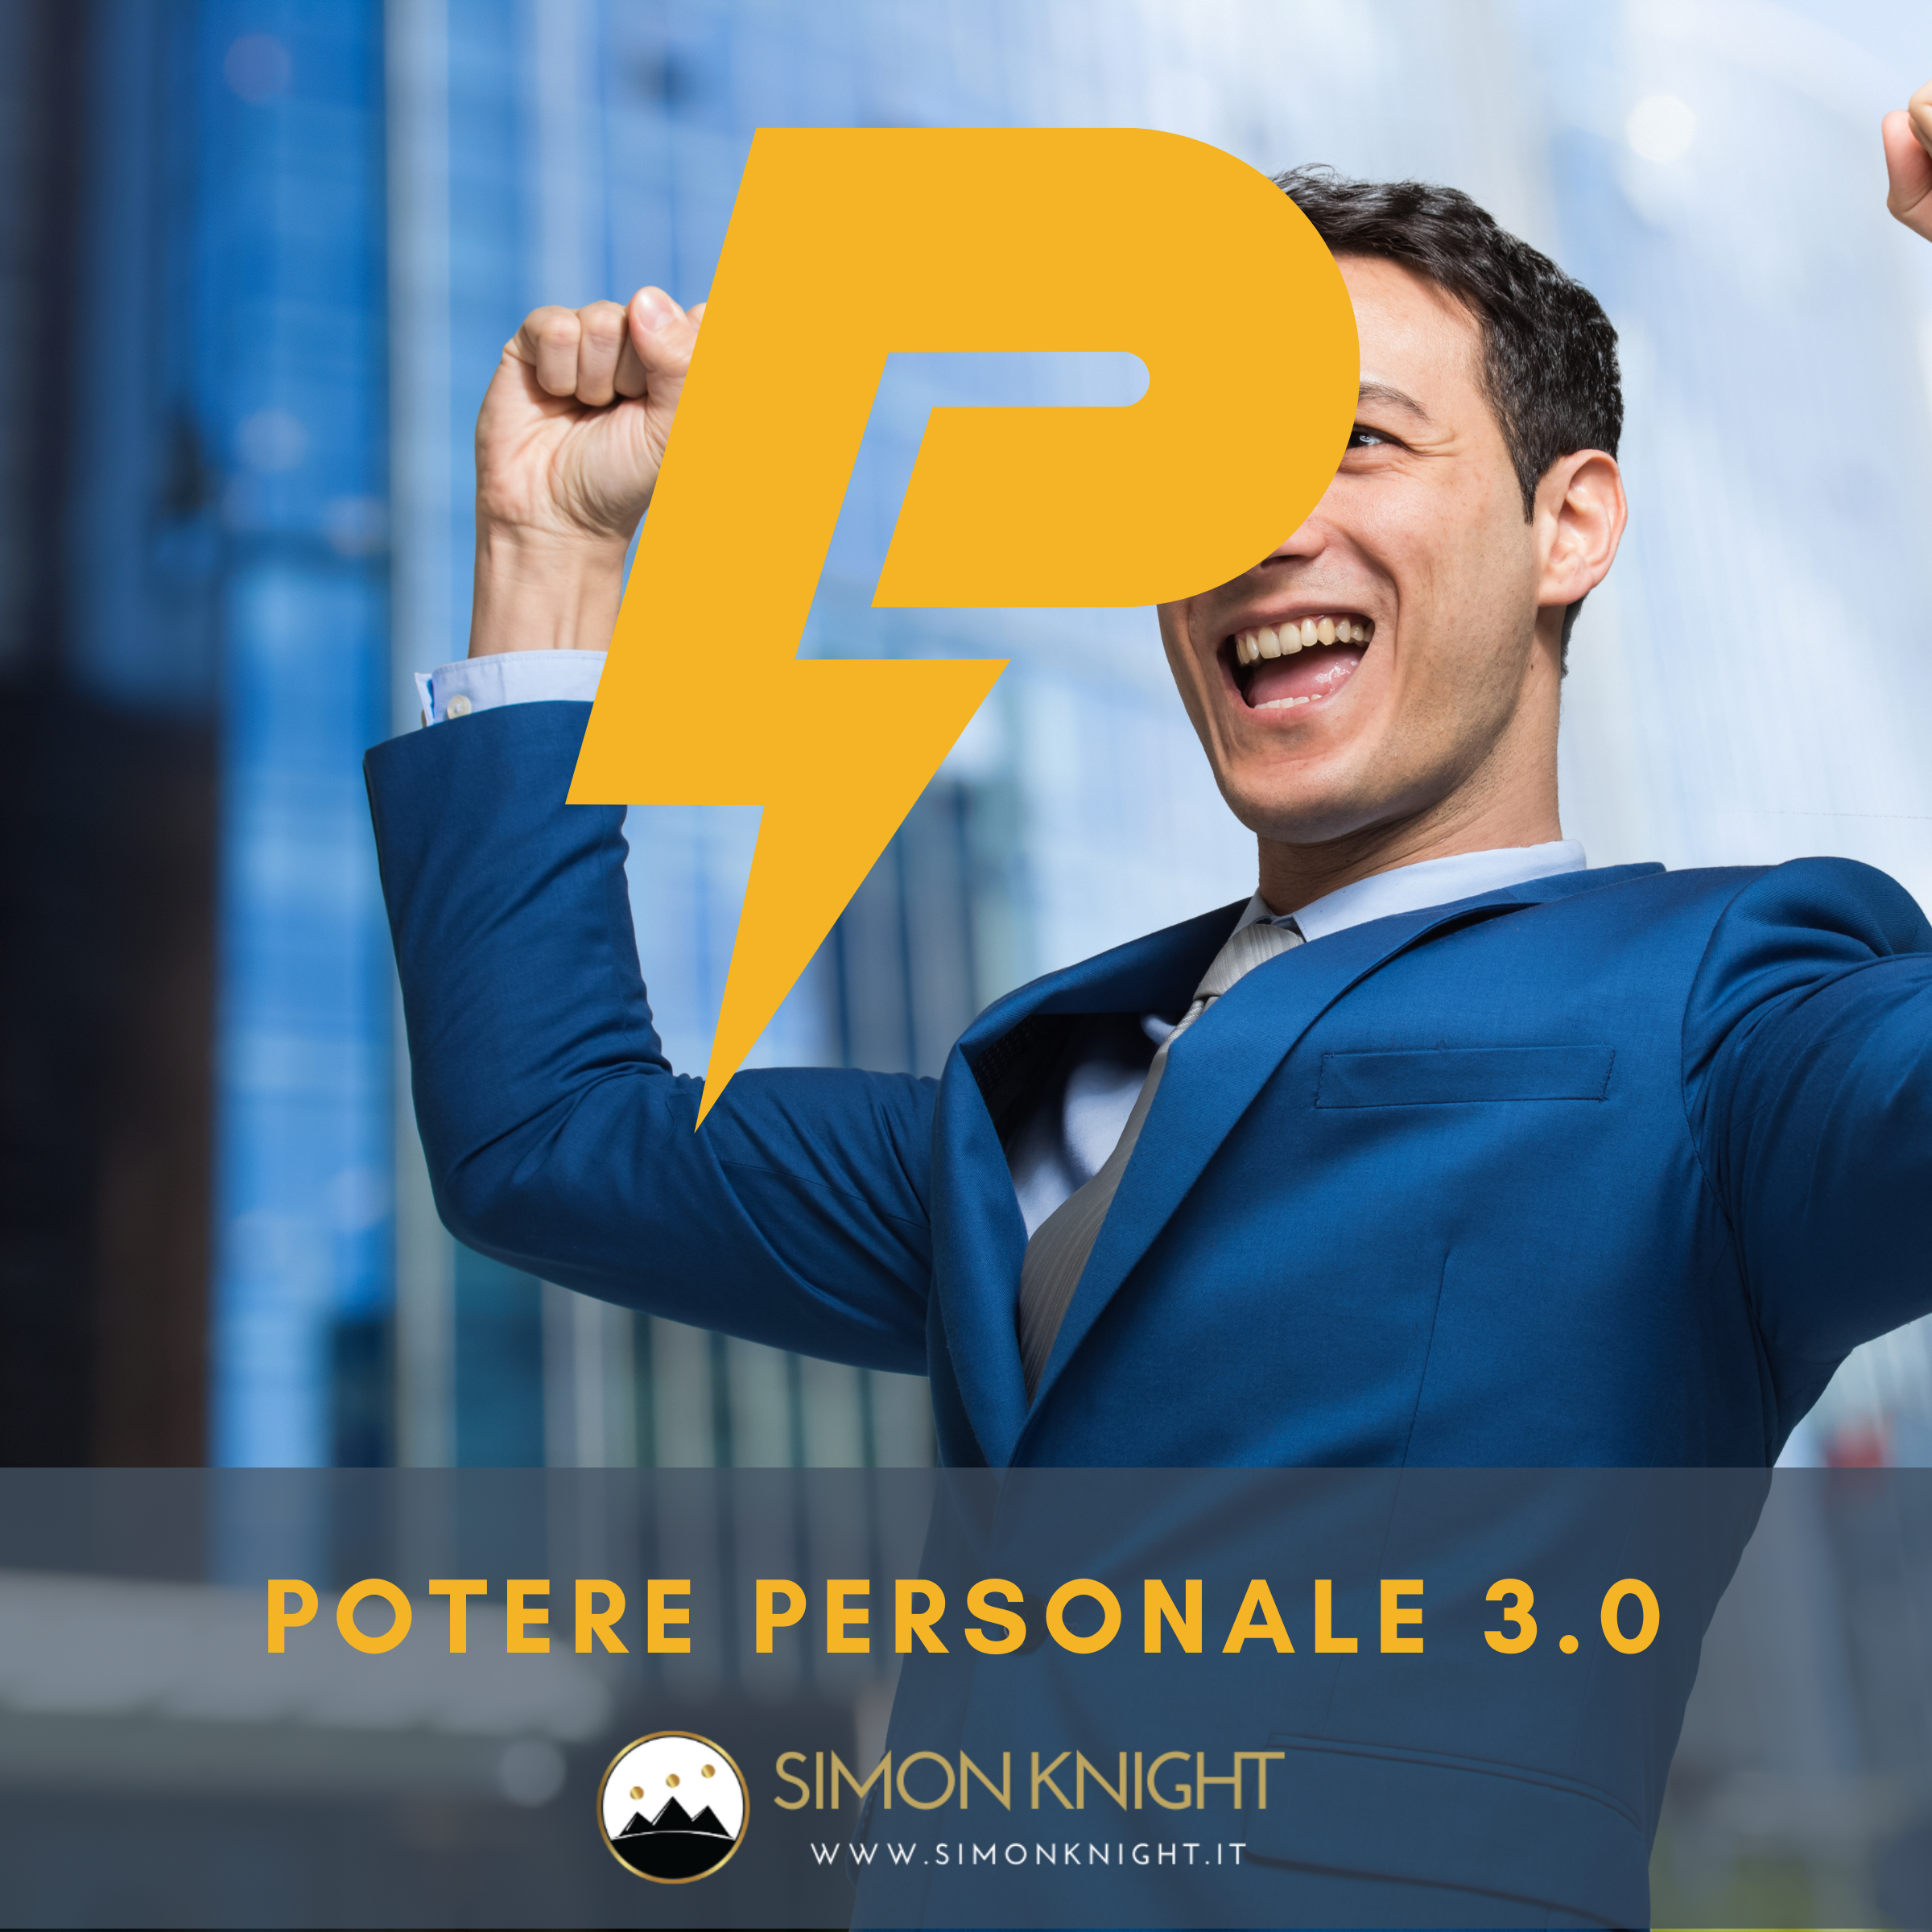 Potere Personale 3.0